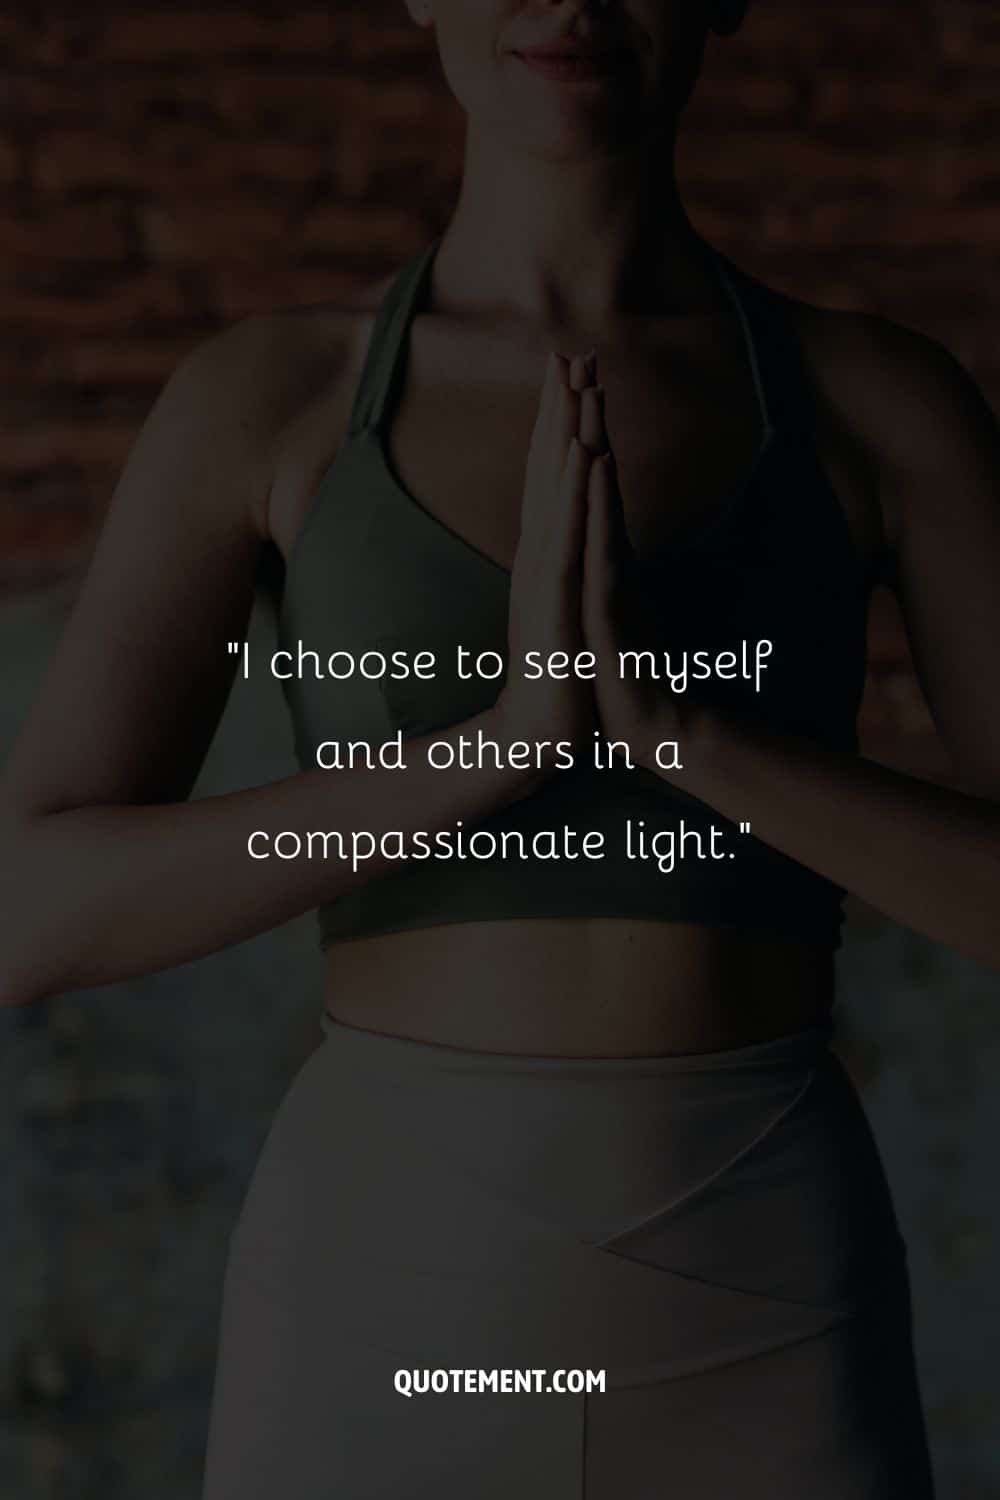 I choose to see myself and others in a compassionate light.